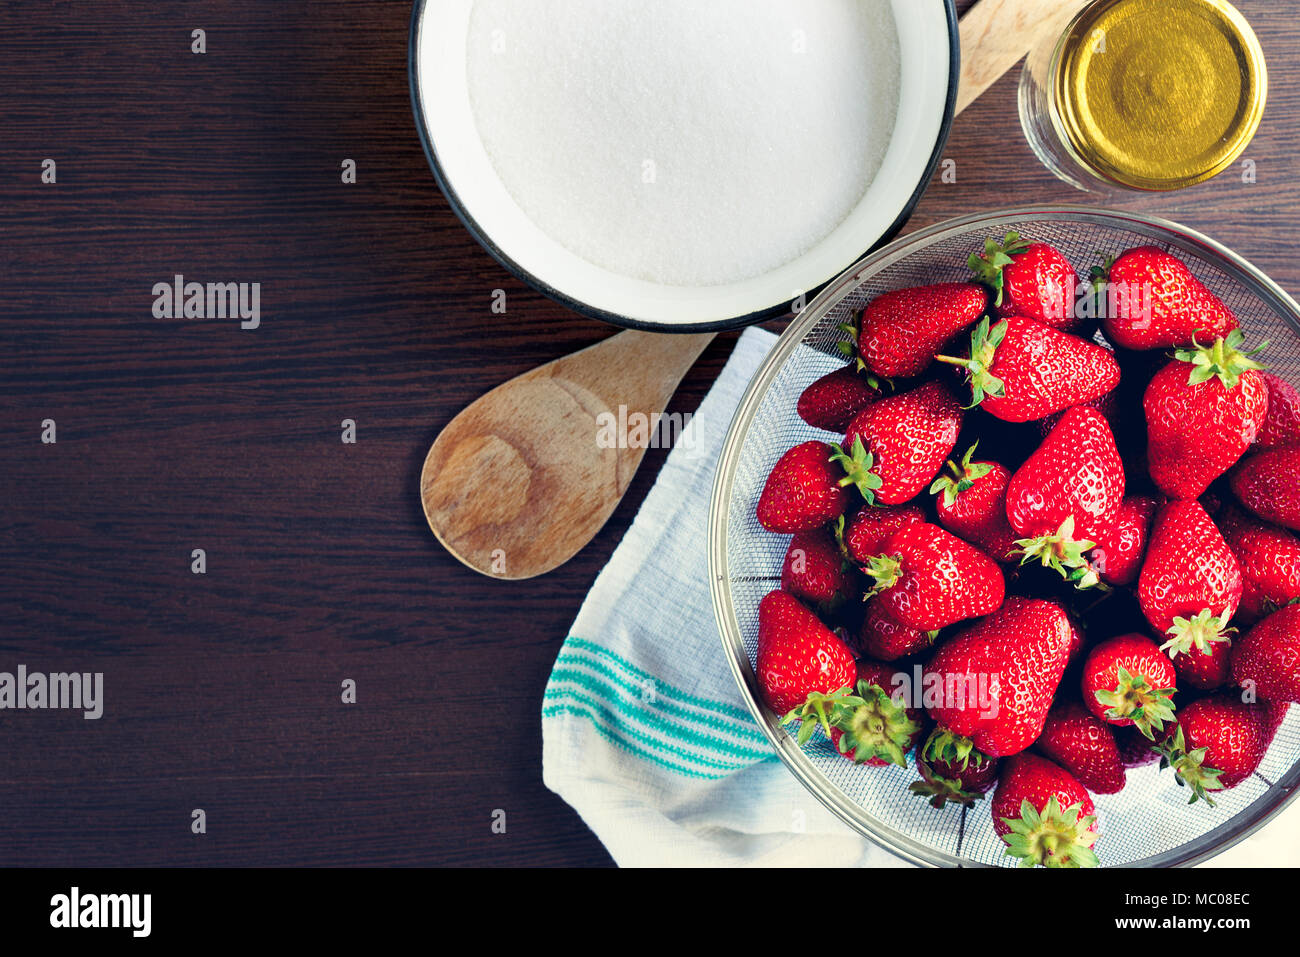 Top view of fresh strawberries and sugar. Strawberry jam ingredients prepared to be cooked. Stock Photo